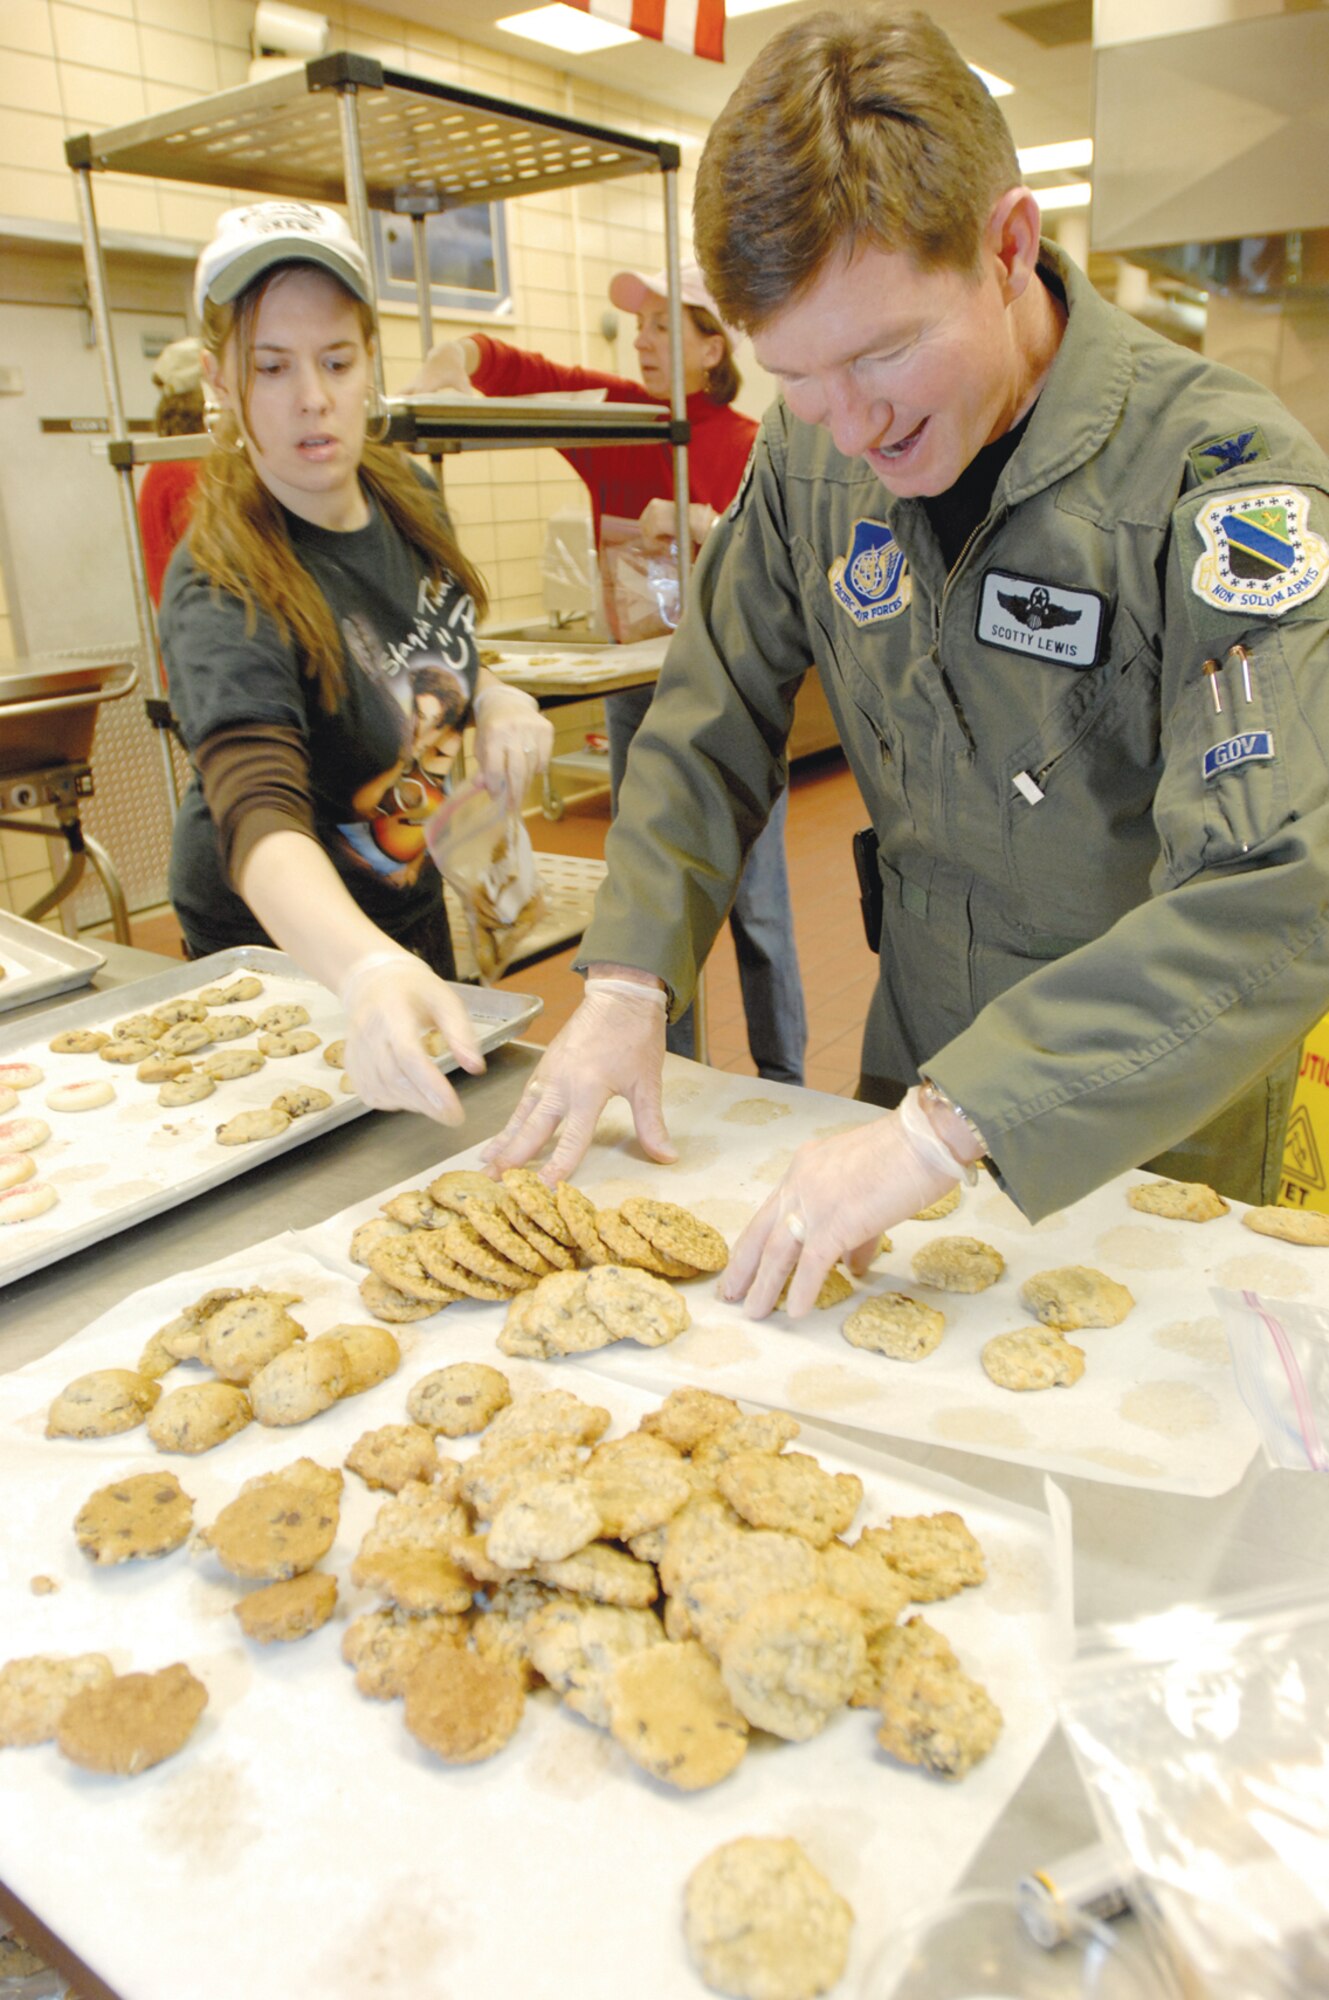 Christina Frey, wife of Capt. Adam Frey, assists Col. Scotty Lewis, 3rd Wing vice commander, as he peels off cookies before they?re packaged for delivery. Volunteers baked cookies as part of the annual cookie caper. The cookies were then delivered by Brig. Gen. Hawk Carlisle, 3rd Wing Commander, Col. Lewis and 3rd Wing Command Chief, Chief Master Sgt. Timothy Carroll.
(U.S. Air Force photo by Tech. Sgt. Keith Brown)